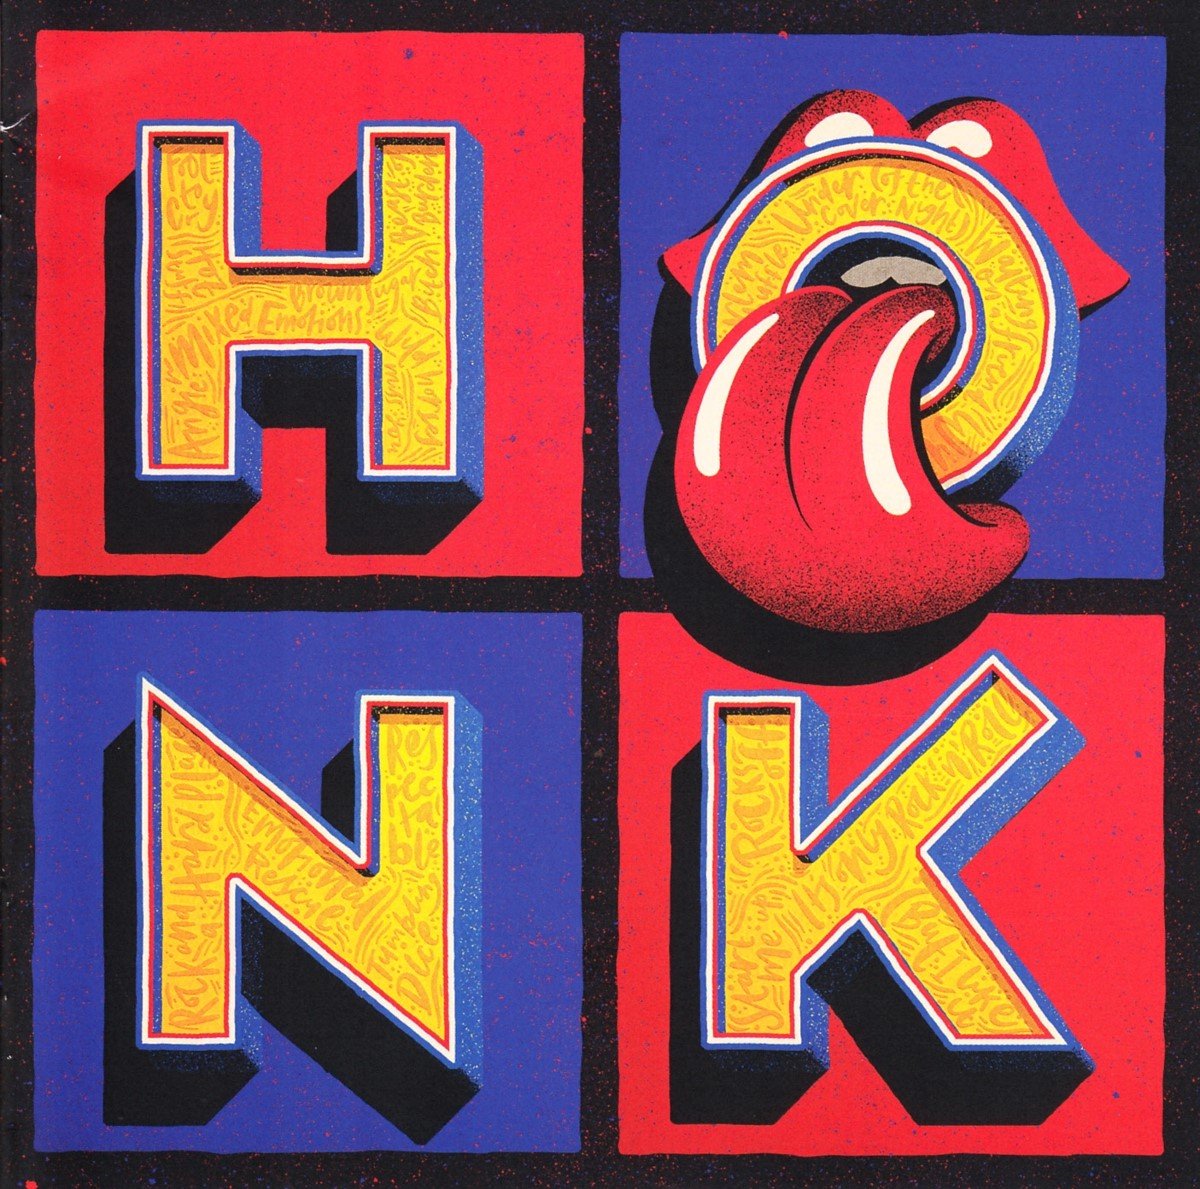 The Rolling Stones - Honk (2 CD) (Limited Edition) - The Rolling Stones